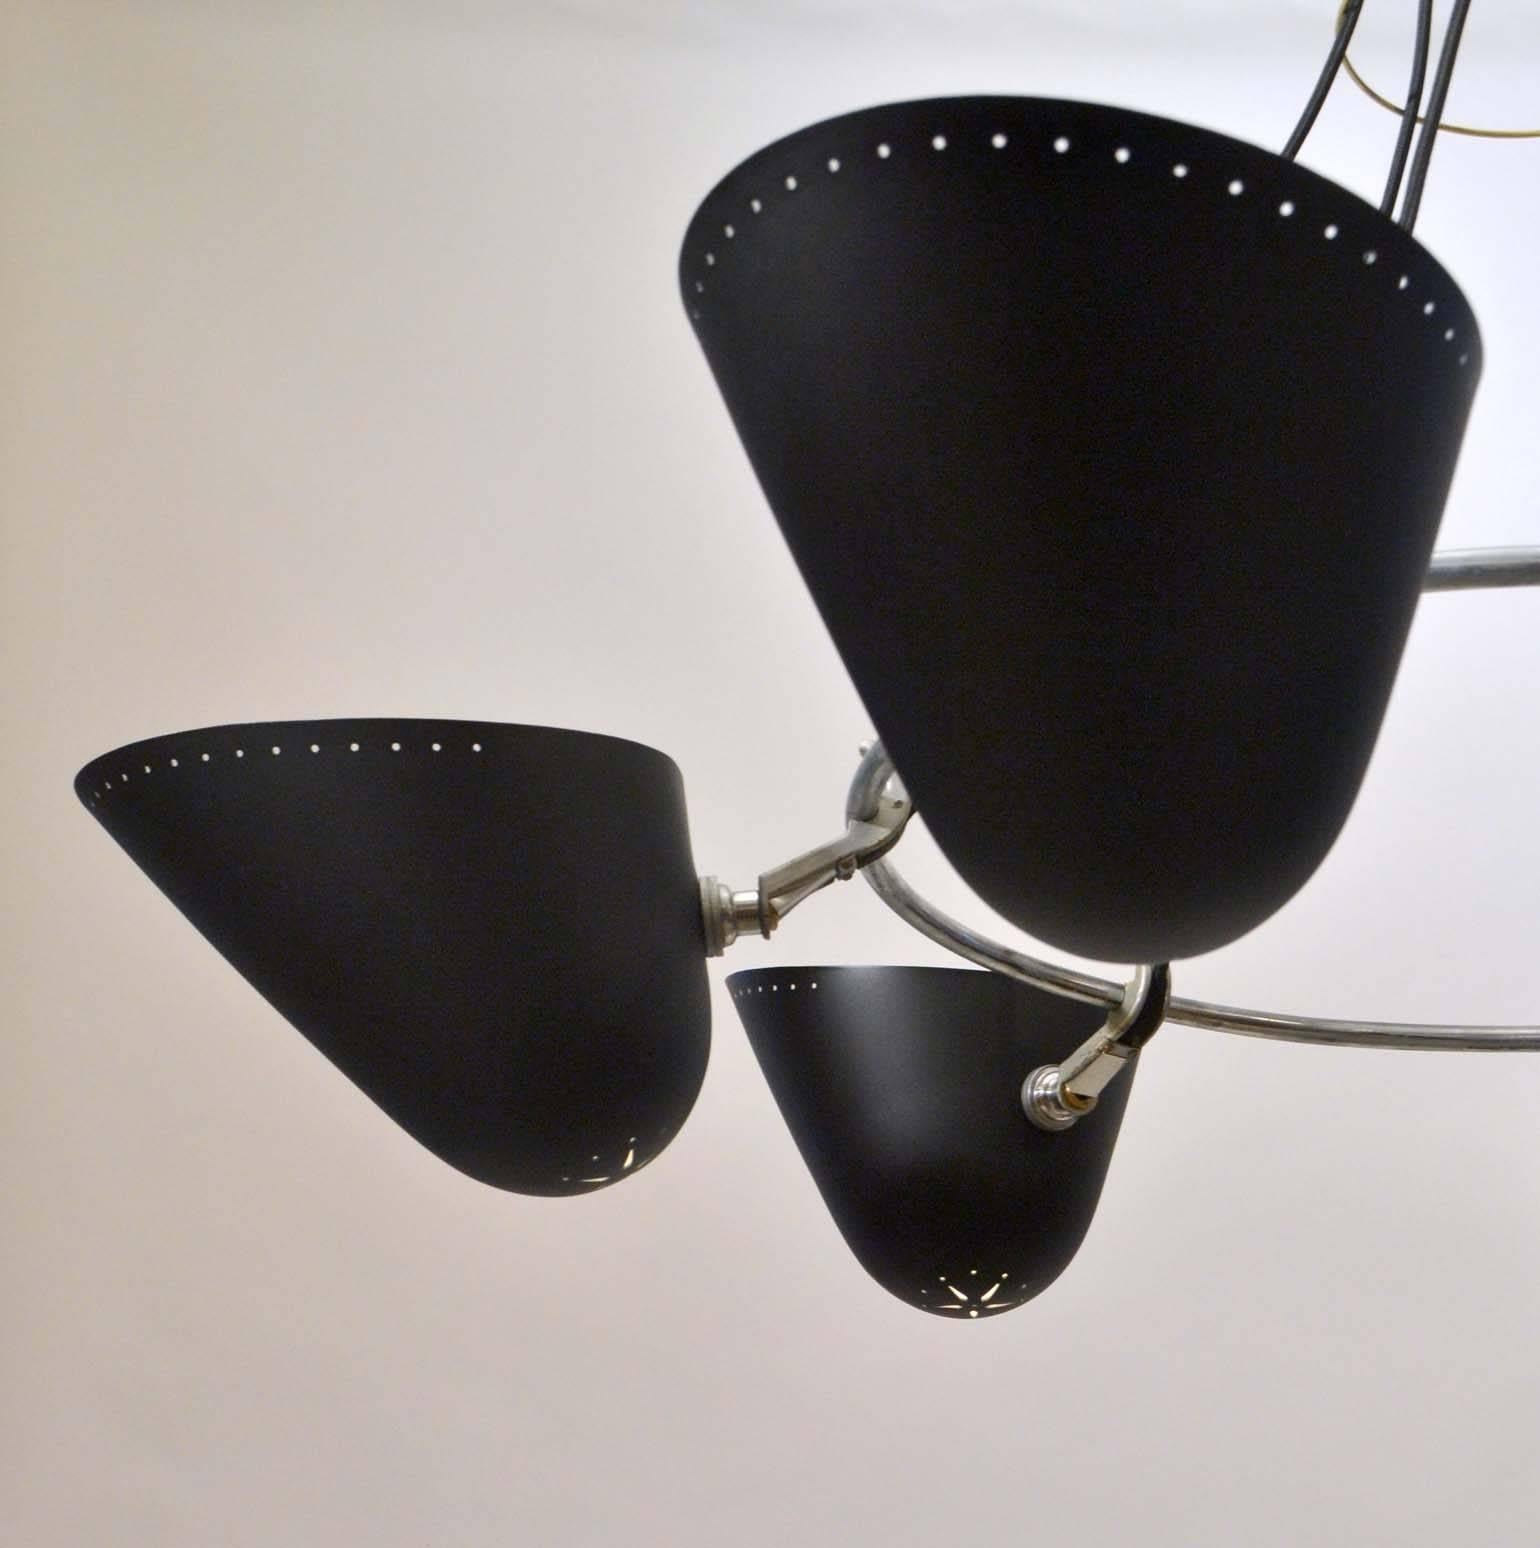 English Large Pair of 1950s Black Metal Chandeliers by A.B. Read for Troughton & Young